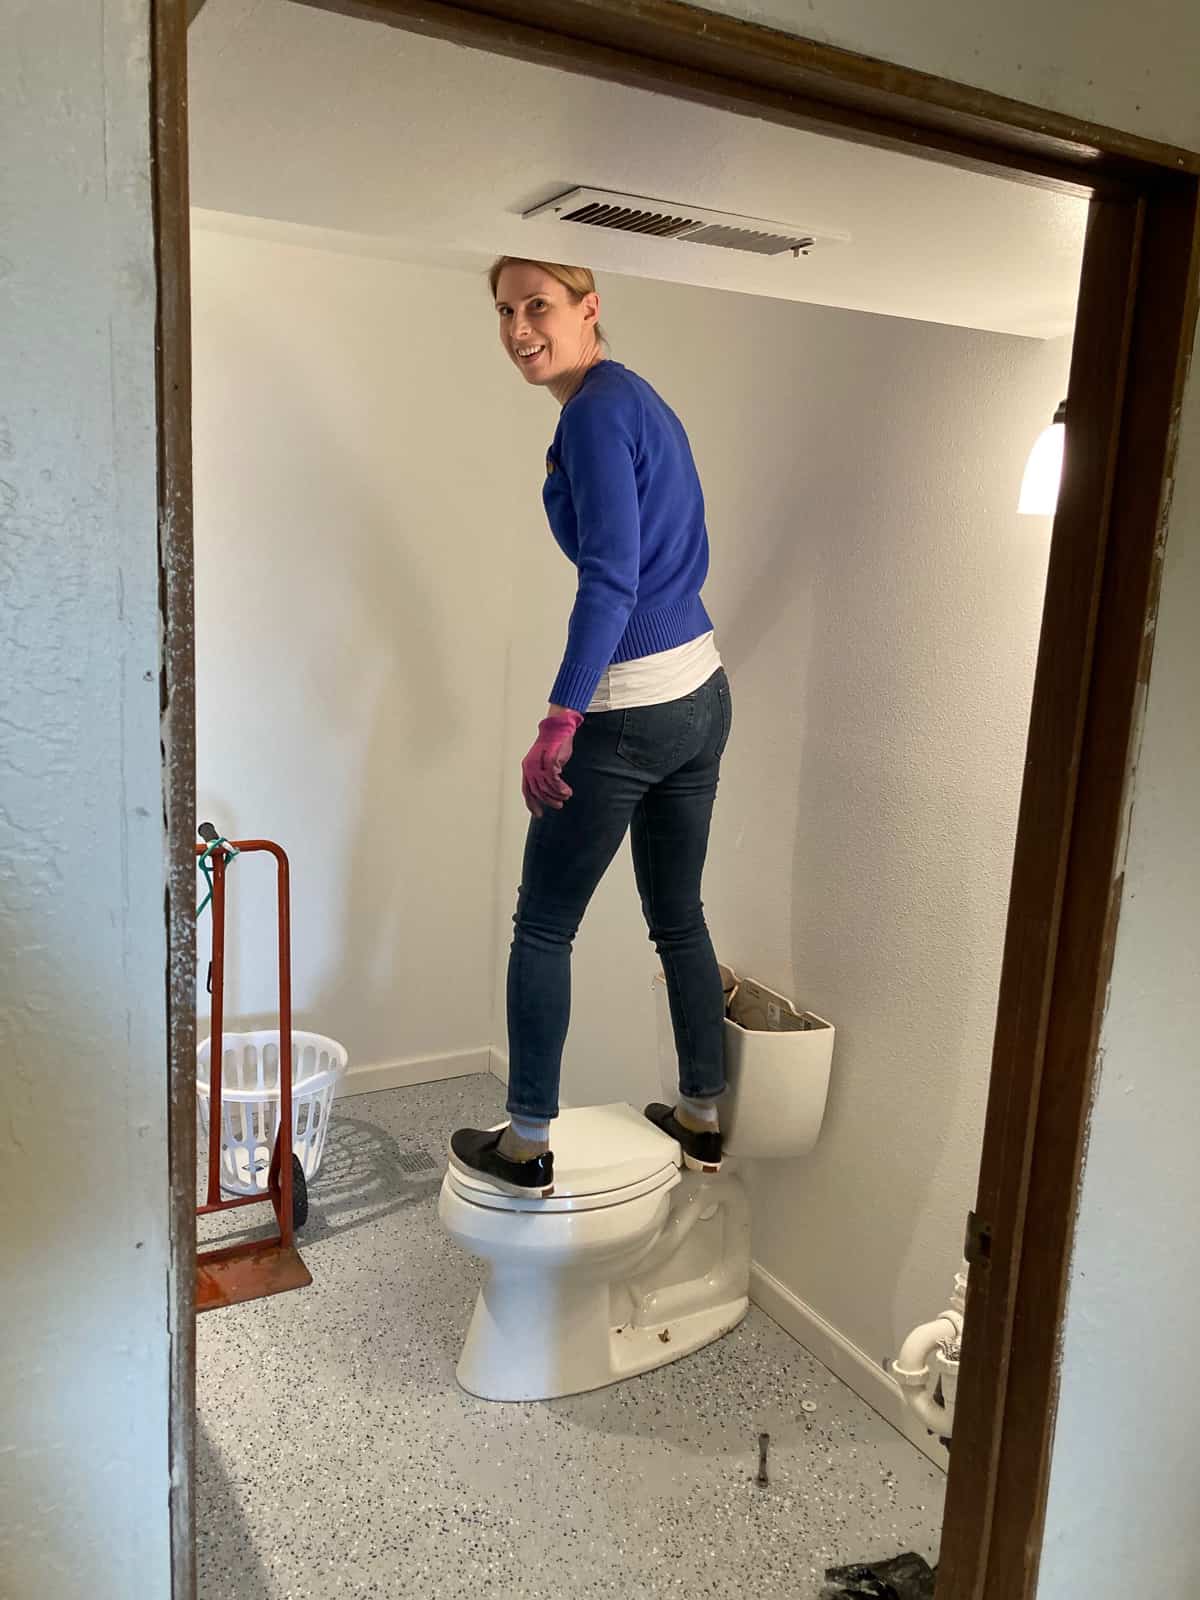 a woman standing on a toilet.